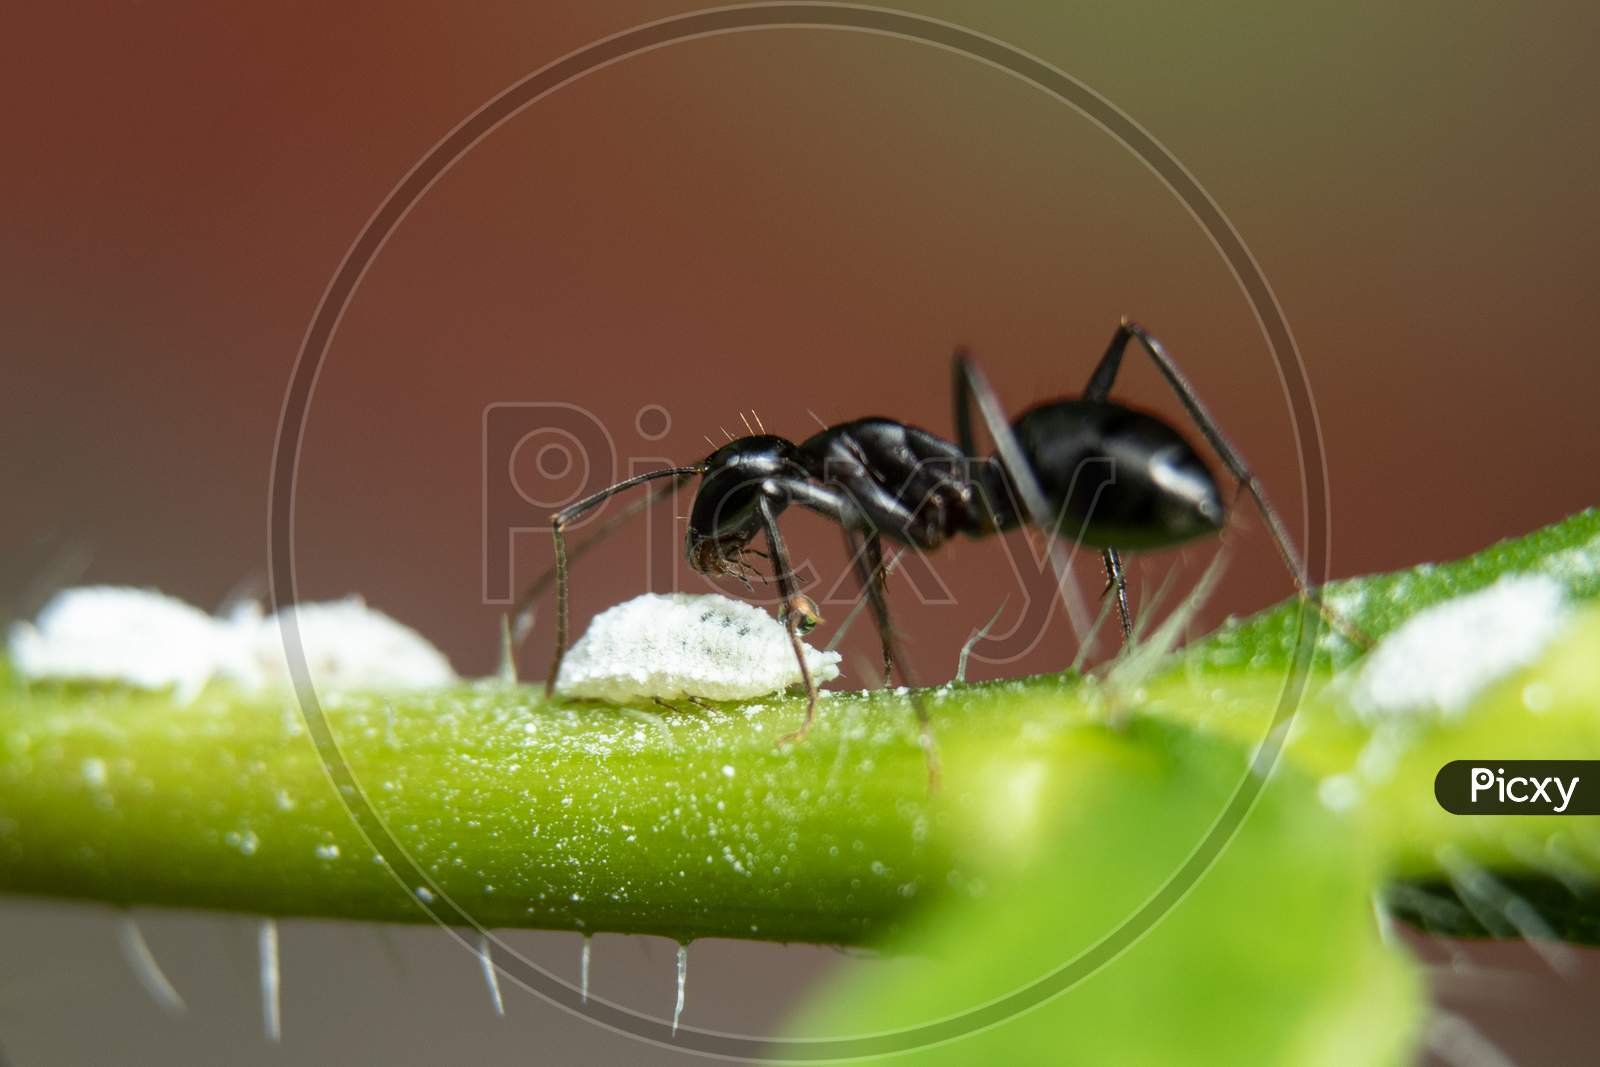 Ants Associated With Mealybugs